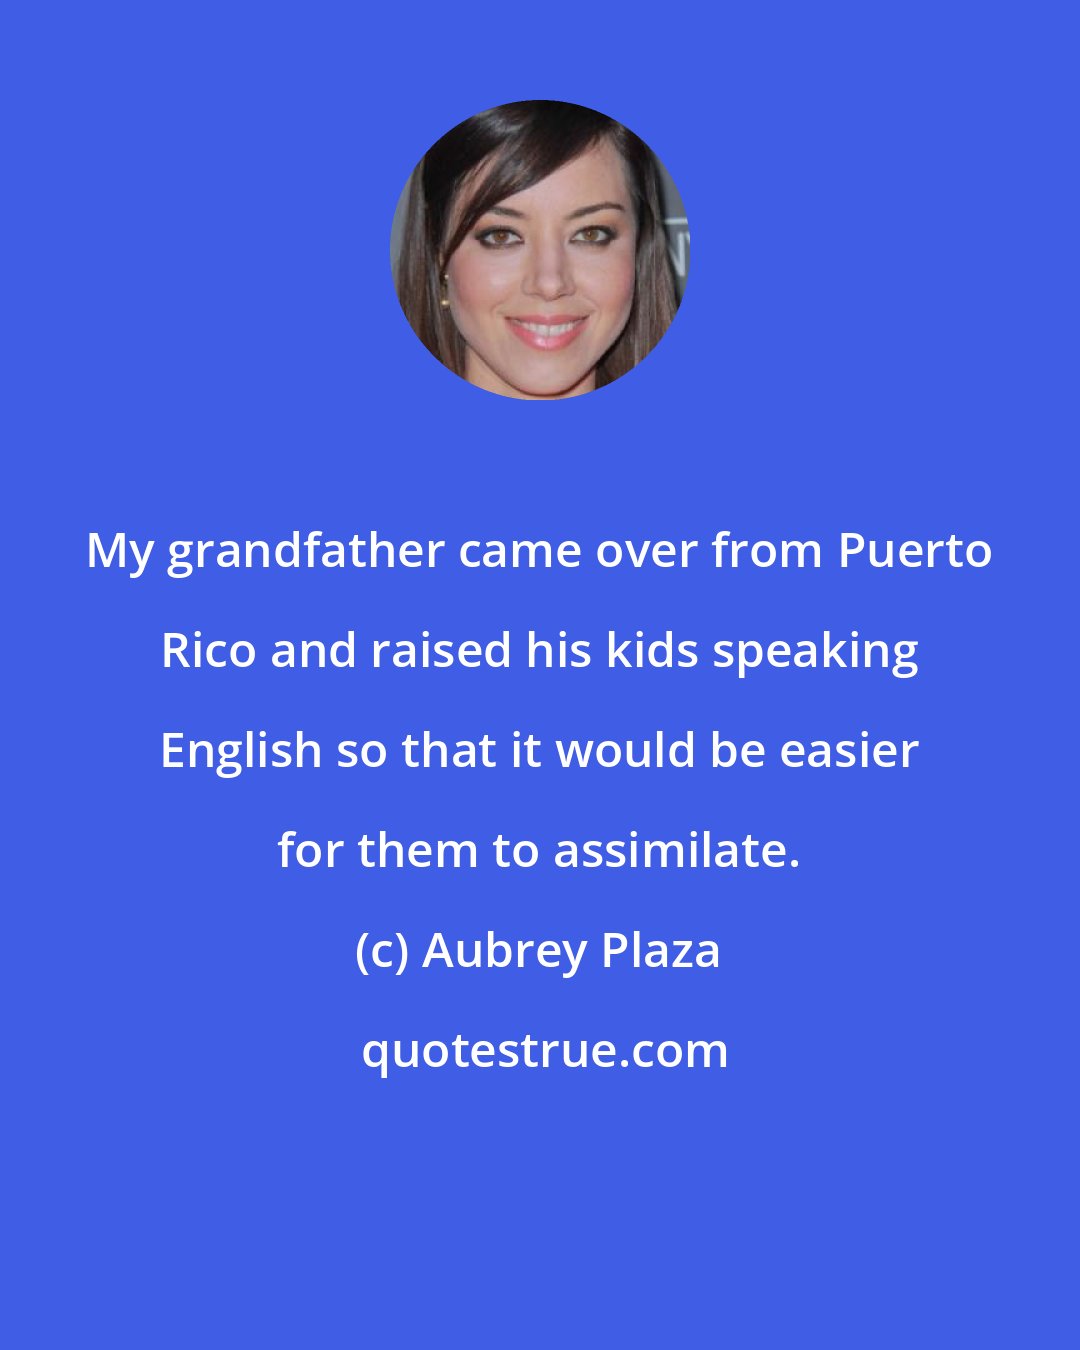 Aubrey Plaza: My grandfather came over from Puerto Rico and raised his kids speaking English so that it would be easier for them to assimilate.